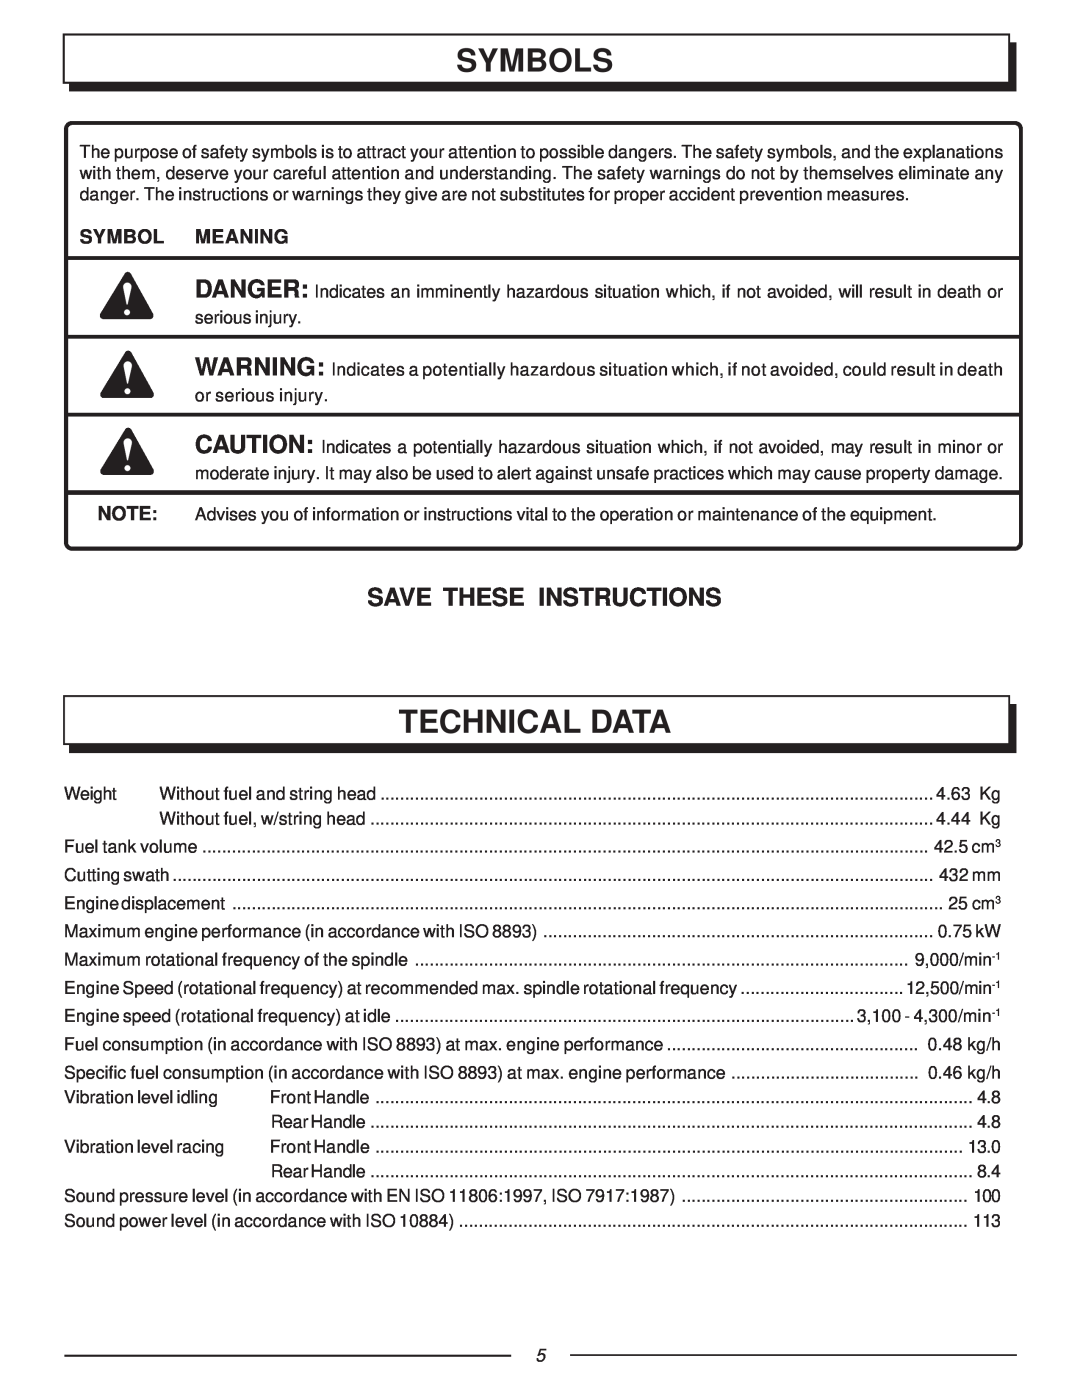 Homelite UT70121A manual Technical Data, Symbols, Save These Instructions, Symbol Meaning 